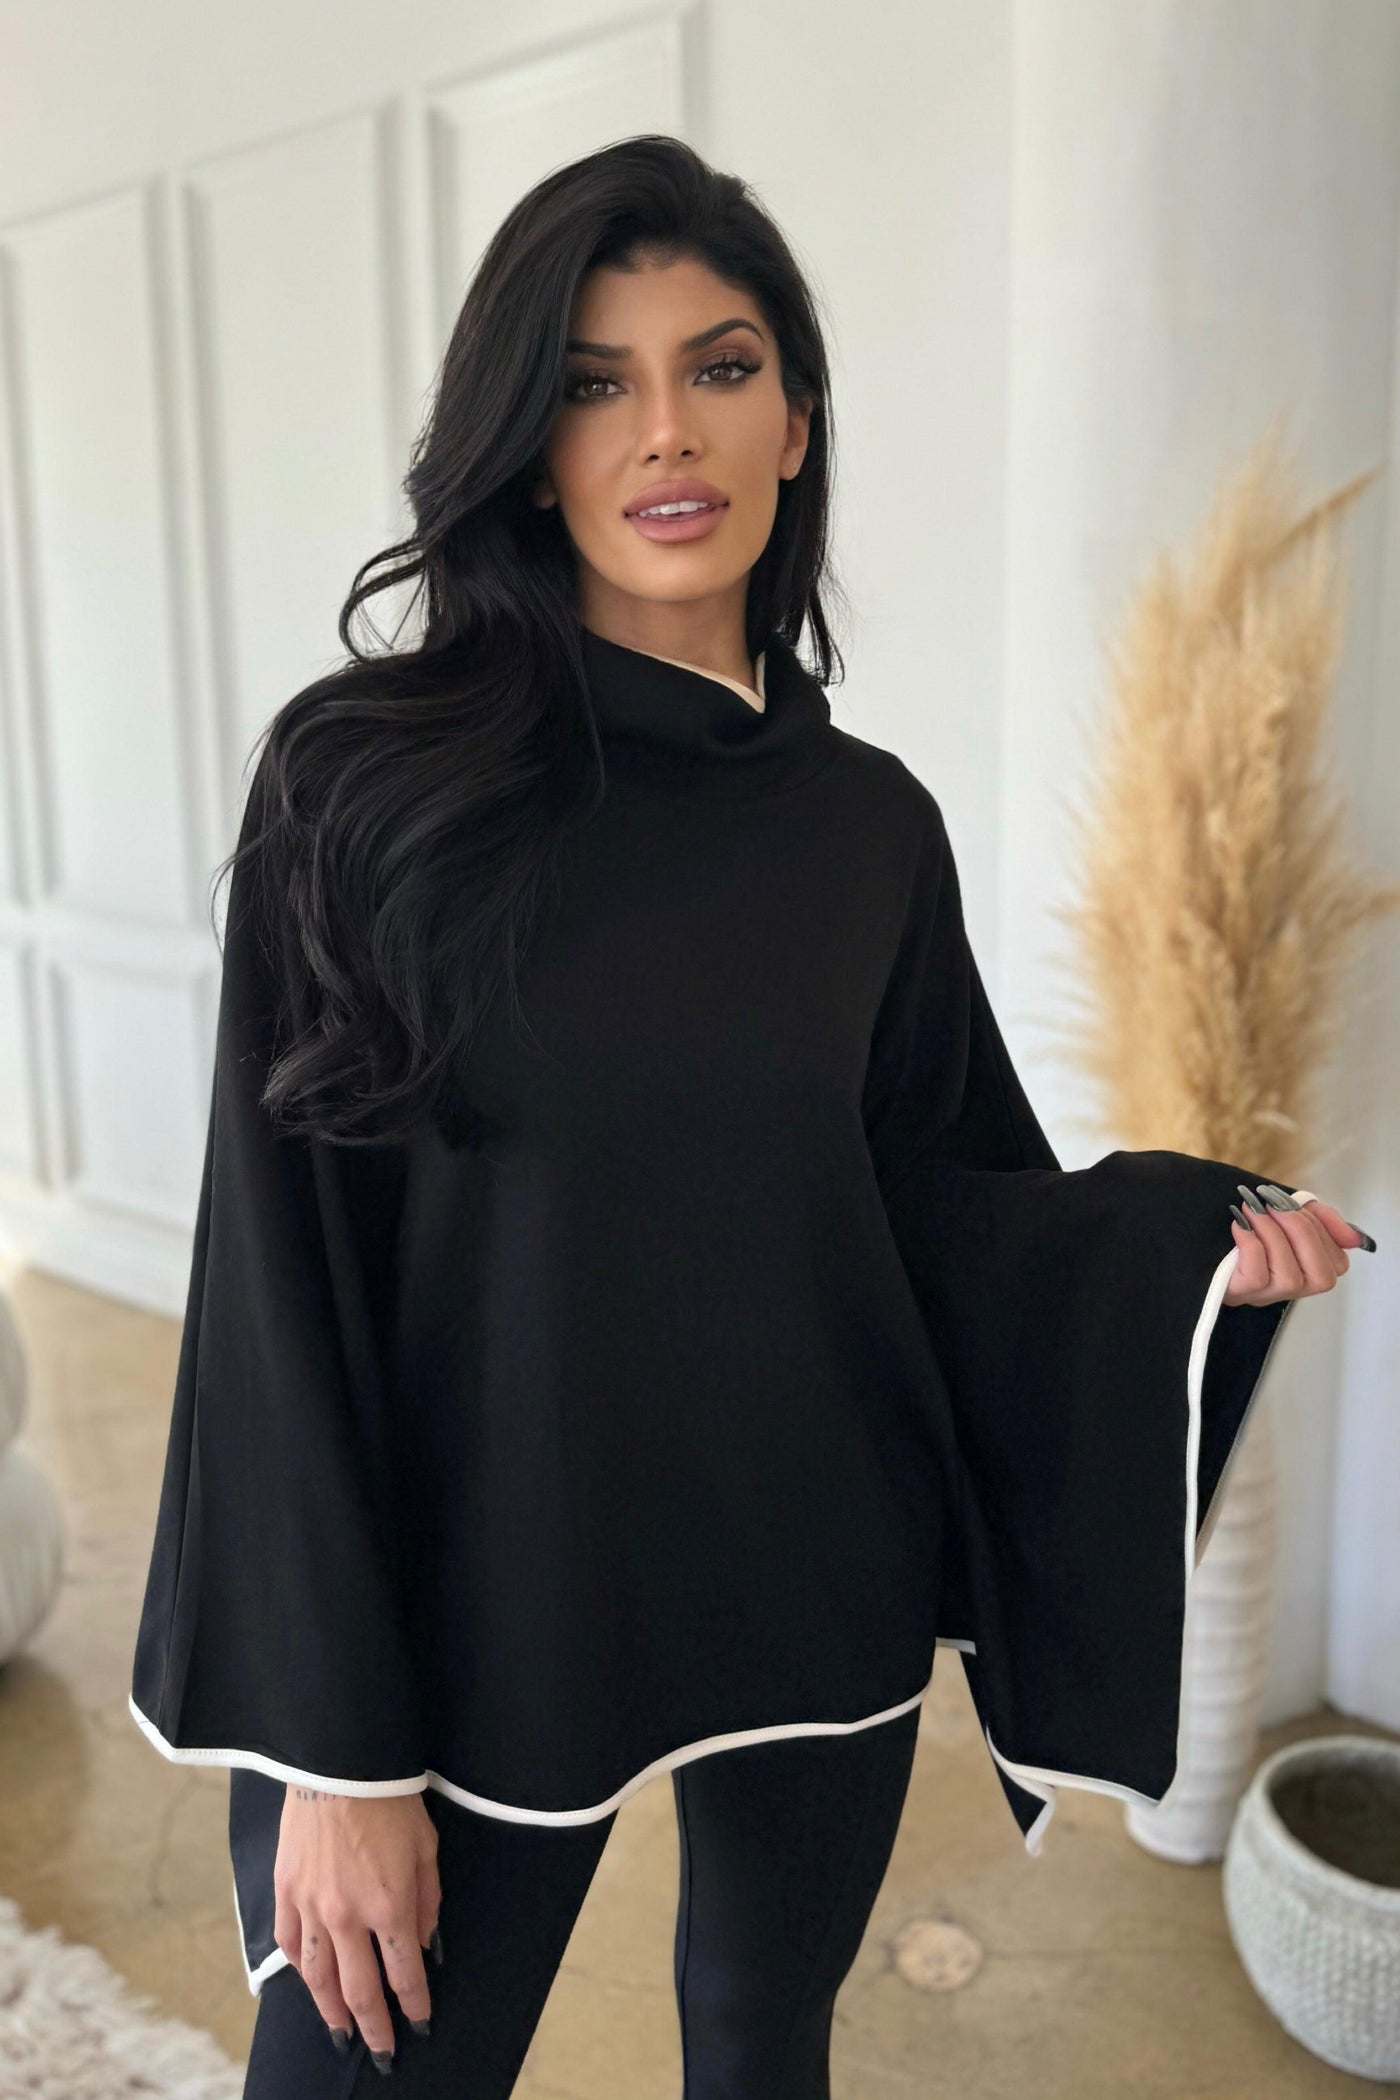 FLORENCE PONCHO SWEATER , poncho , It's NOMB , BLACK PONCHO, BLACK SCUBA FABRIC PONCHO, DRESSY BLACK PONCHO WITH WHITE PIPING, poncho sweater, TURTLENECK PONCHO , It's NOMB , itsnomb.com